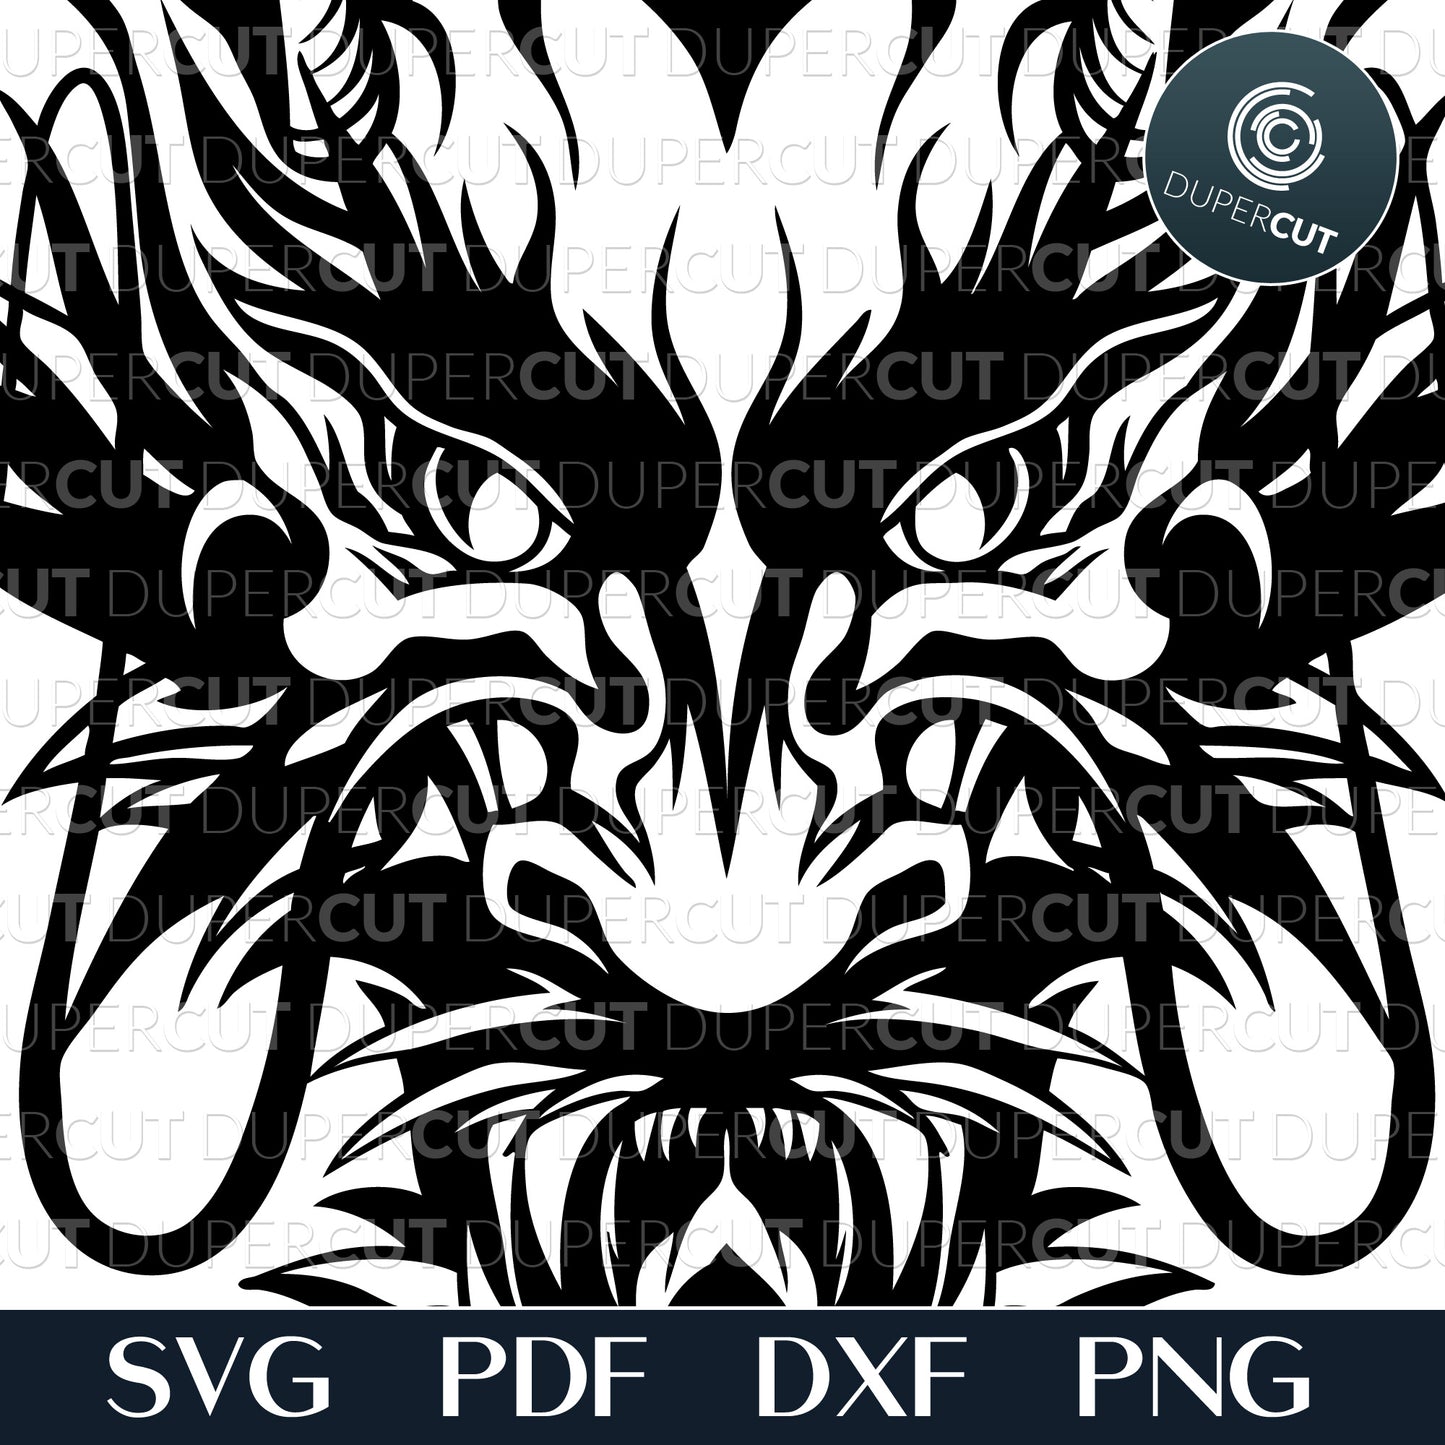 Chinese dragon head. Line art tattoo. Papercutting template for commercial use. SVG files for Silhouette Cameo, Cricut, Glowforge, DXF for CNC, laser cutting, print on demand